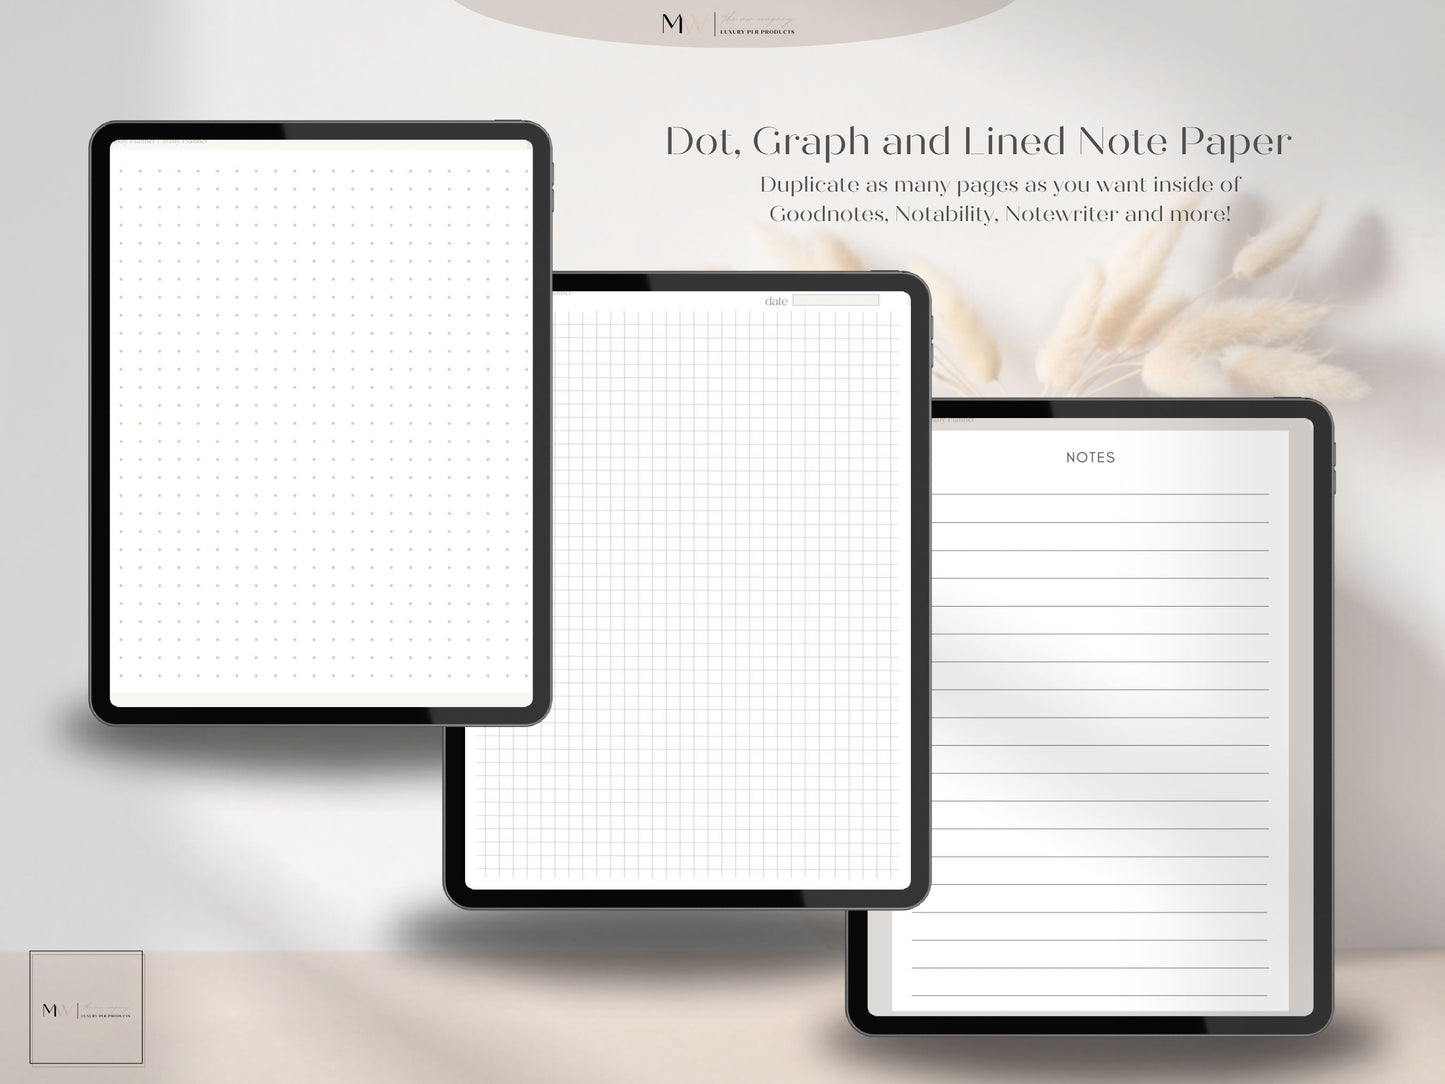 This page shows the note pages that are included with the digital planner thatcan be used in goodnotes.